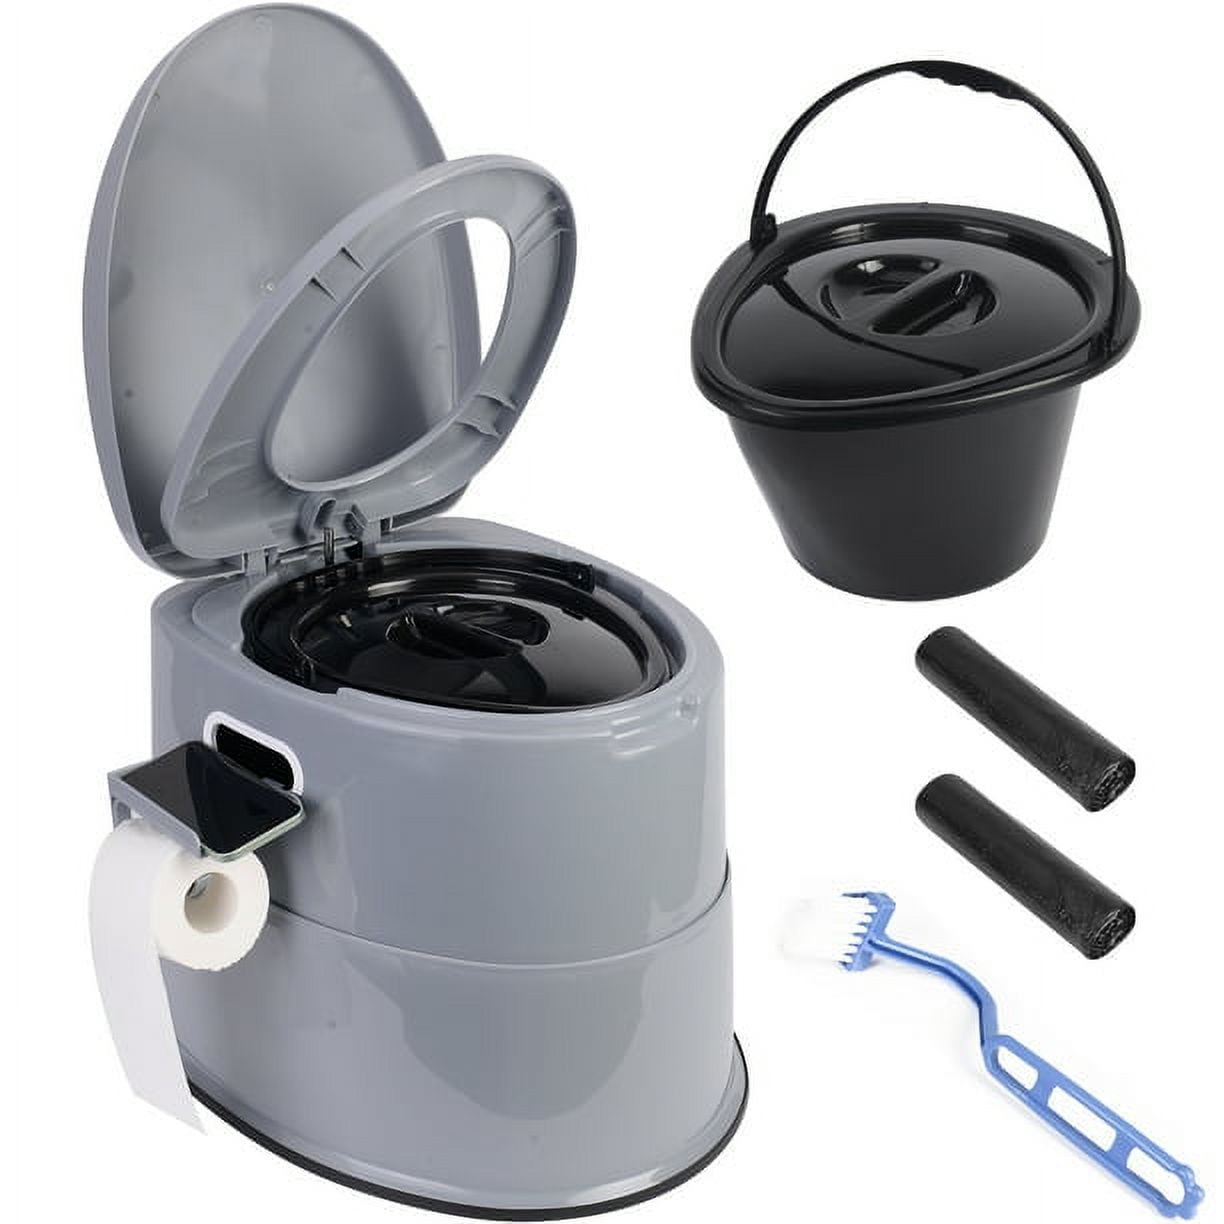 Tiktun Portable Camping Toilet with Detachable Inner Bucket and Removable Toilet Paper Holder